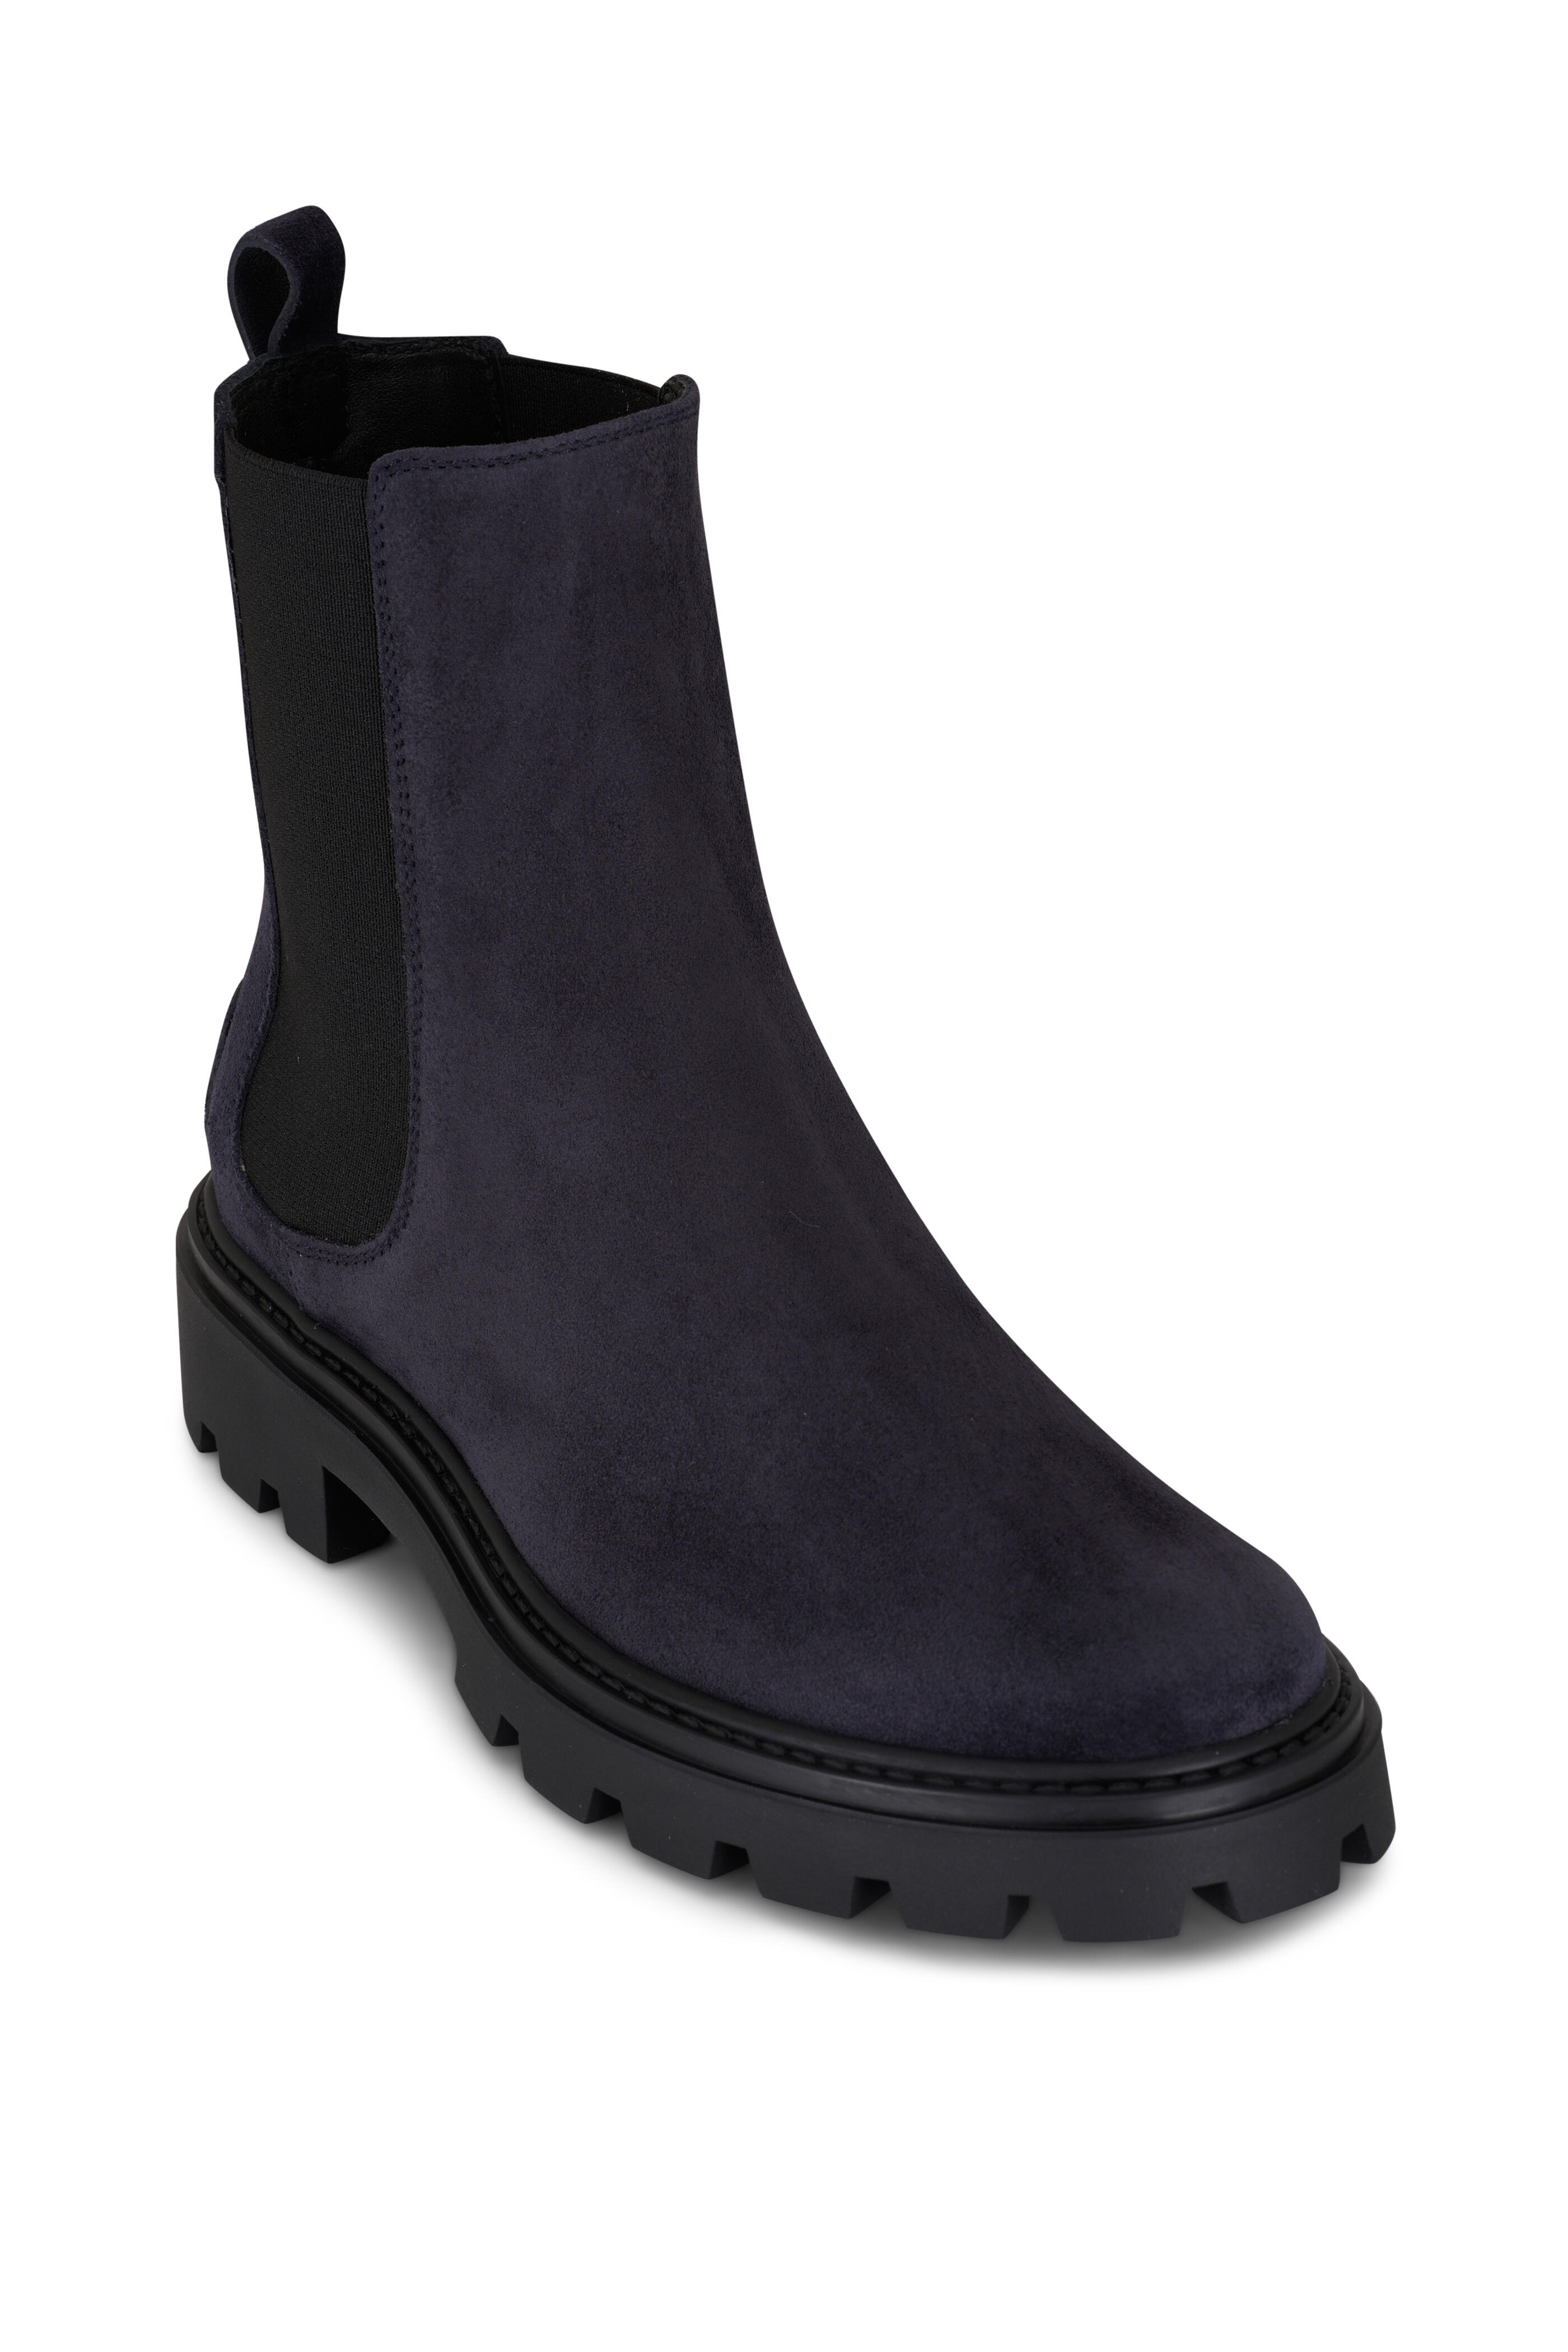 Tod's Women's Dark Galaxy Suede Lug Sole Chelsea Boot | 6 M by Mitchell Stores